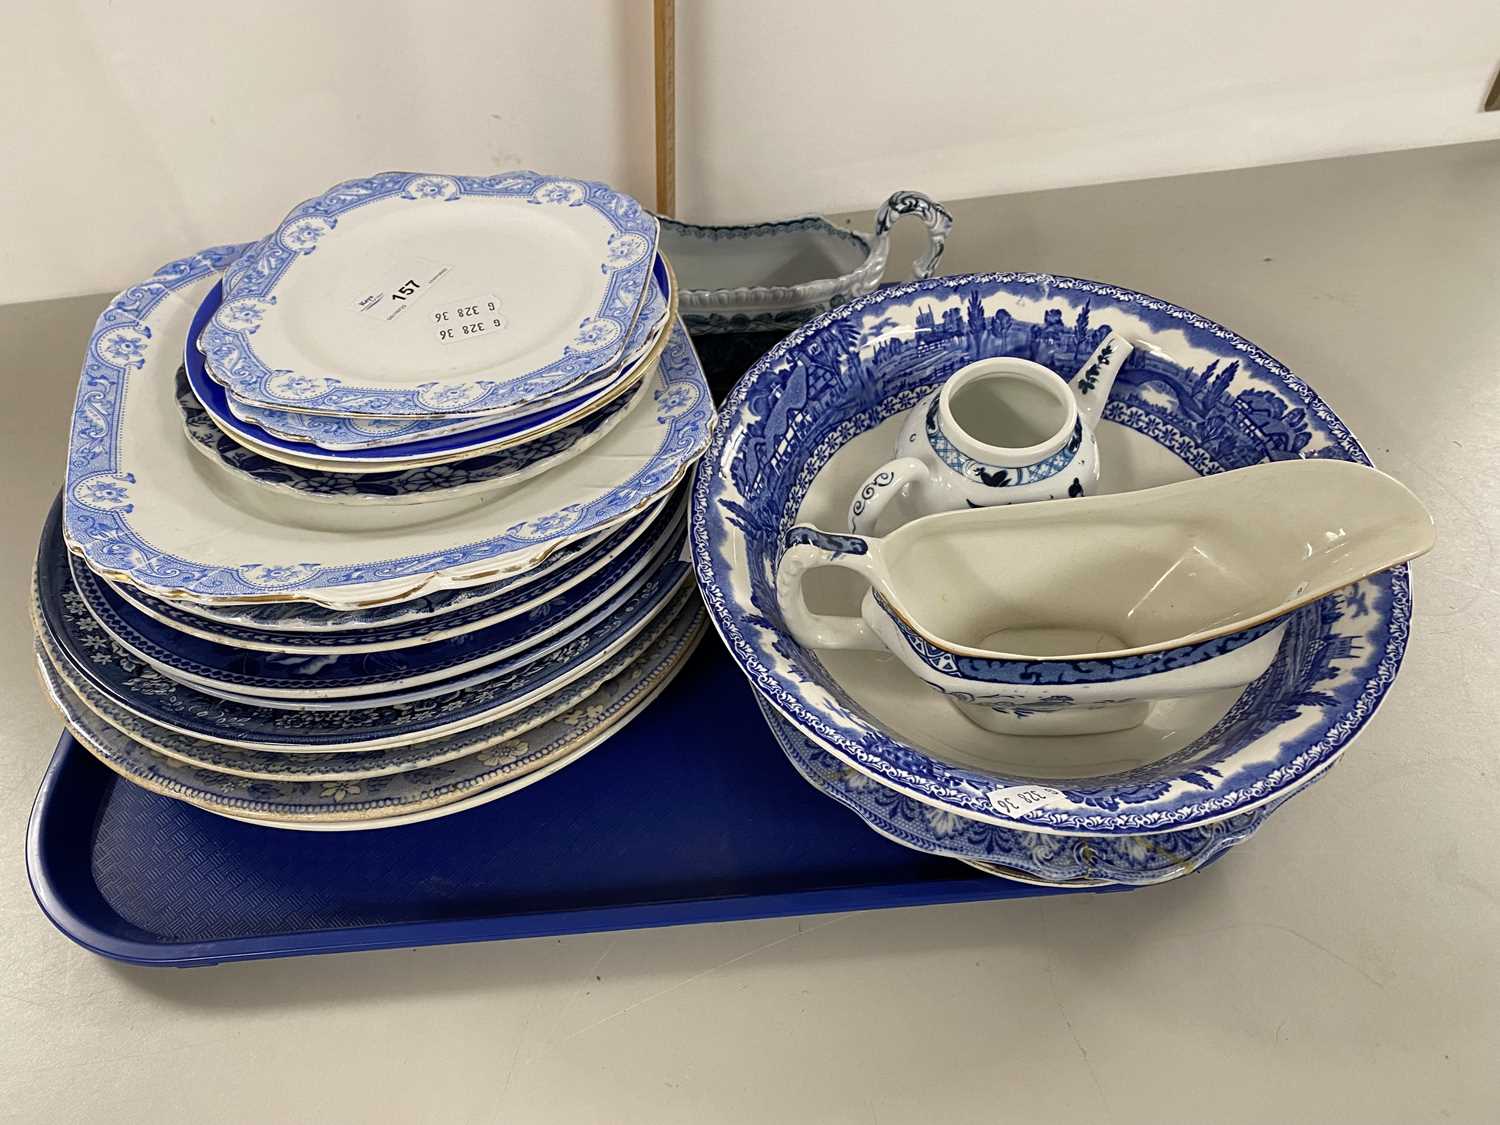 Mixed Lot: Various decorated blue and white plates, bowls, dishes and other items